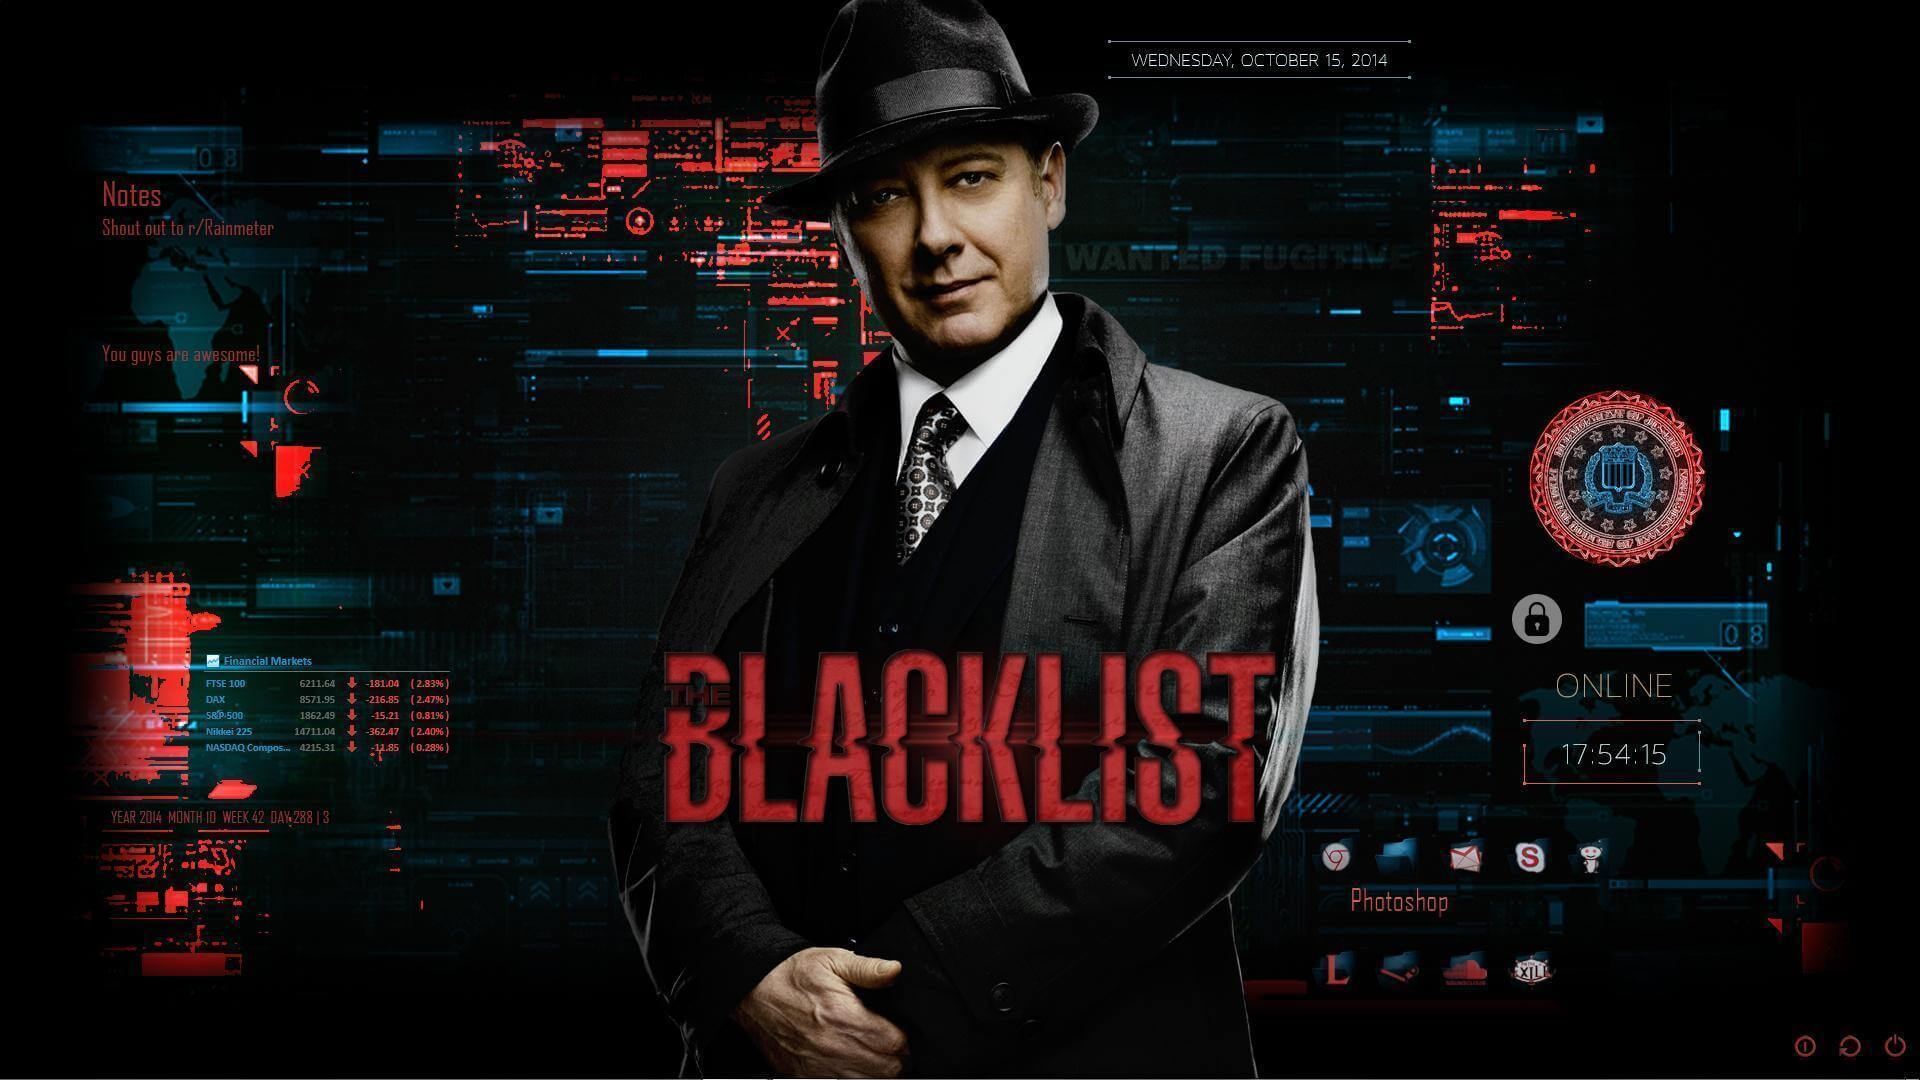 The Blacklist Cast Real Names, All Characters Original Names with Photographs